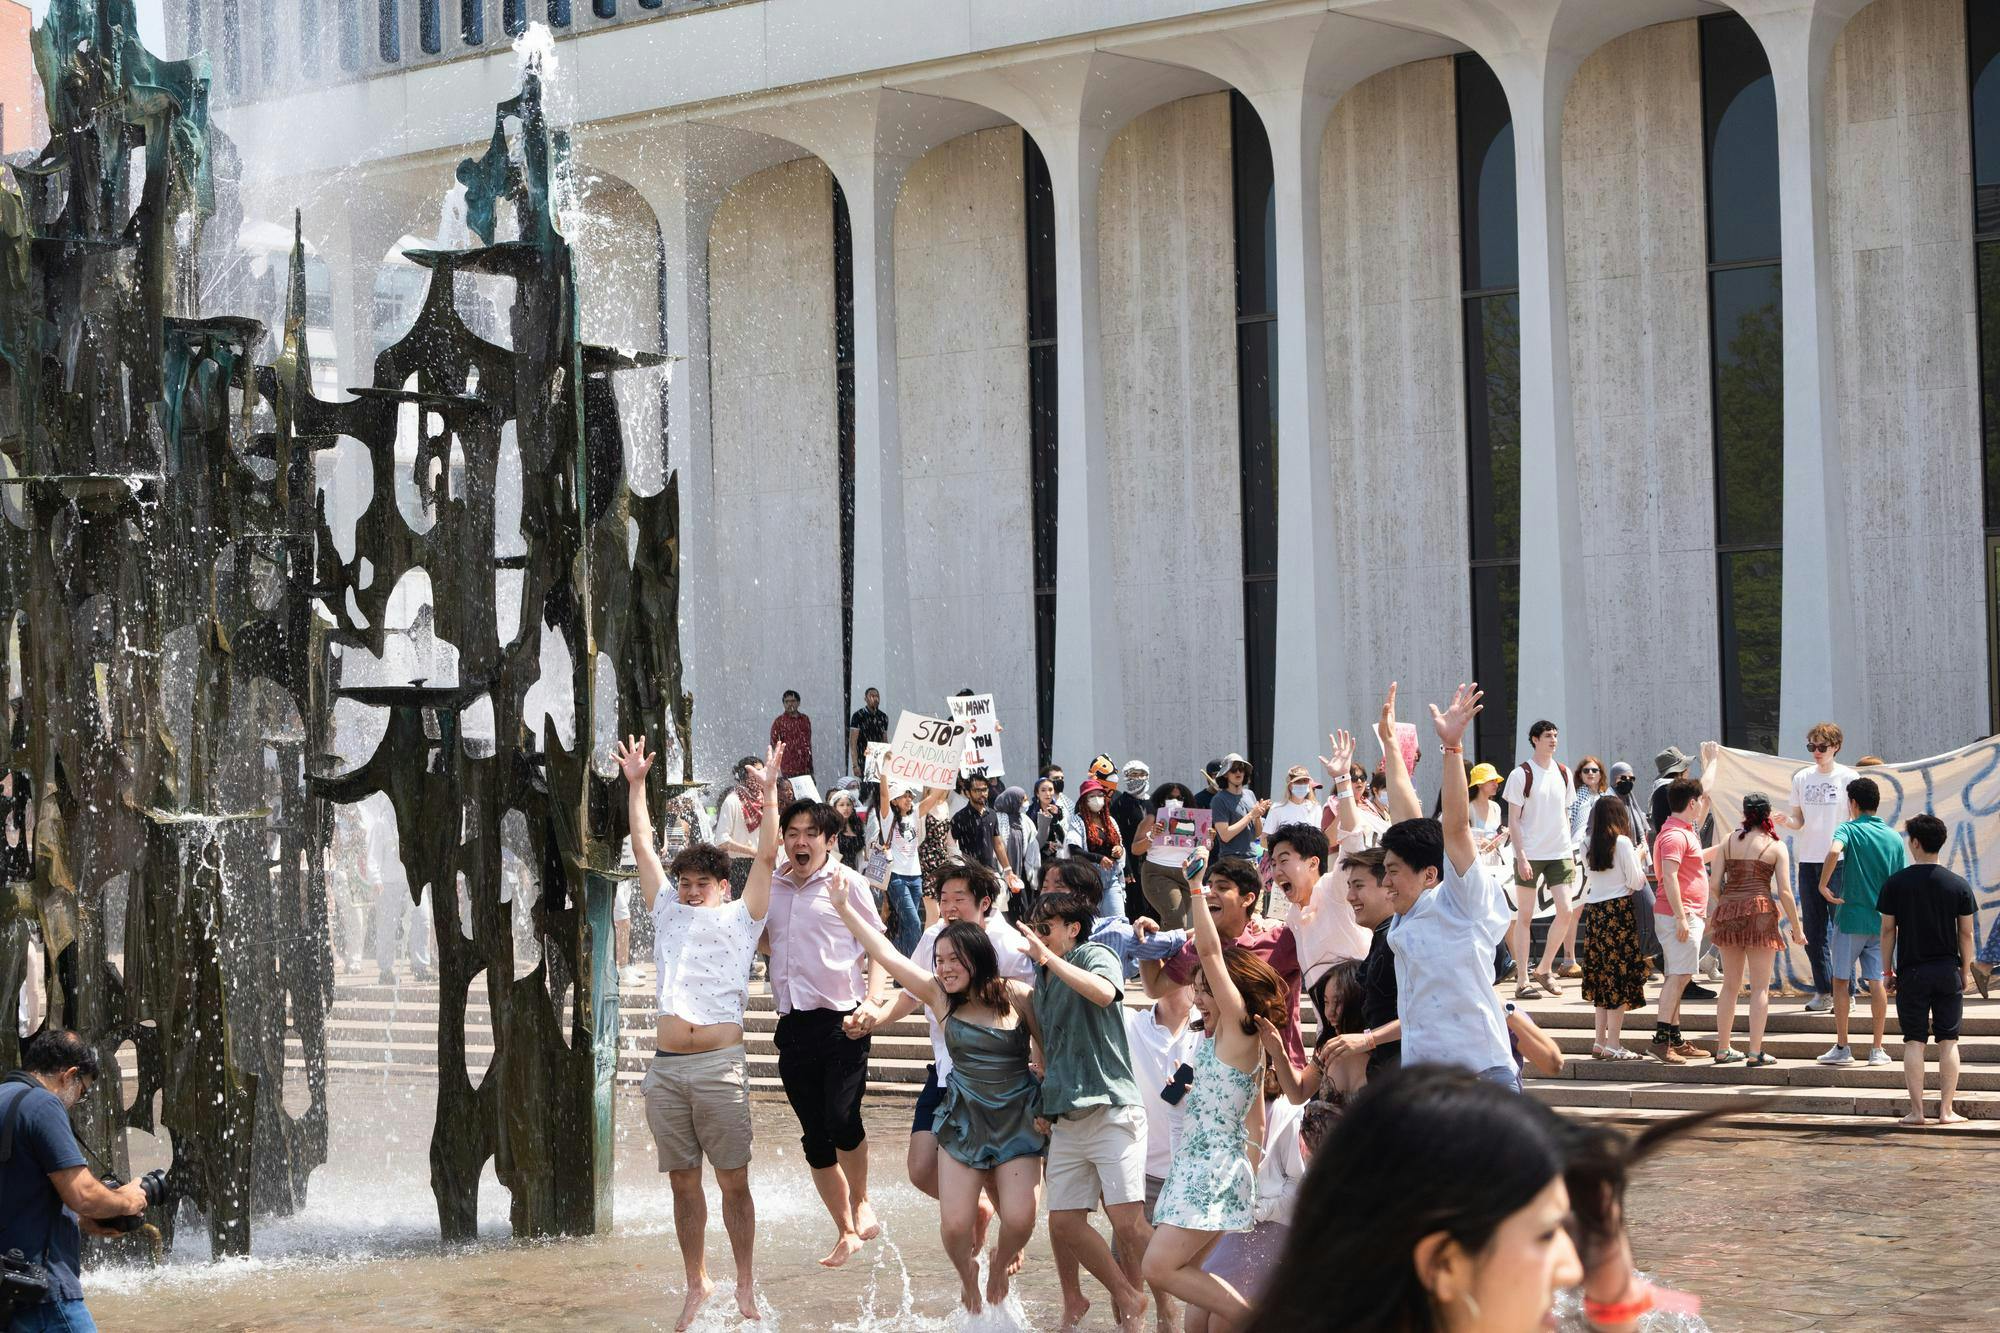 In the foreground, Lawnparties attendees wearing pastel colors jump for a photo in a fountain. In the background, protesters holding signs march by the fountain outside Robertson Hall.